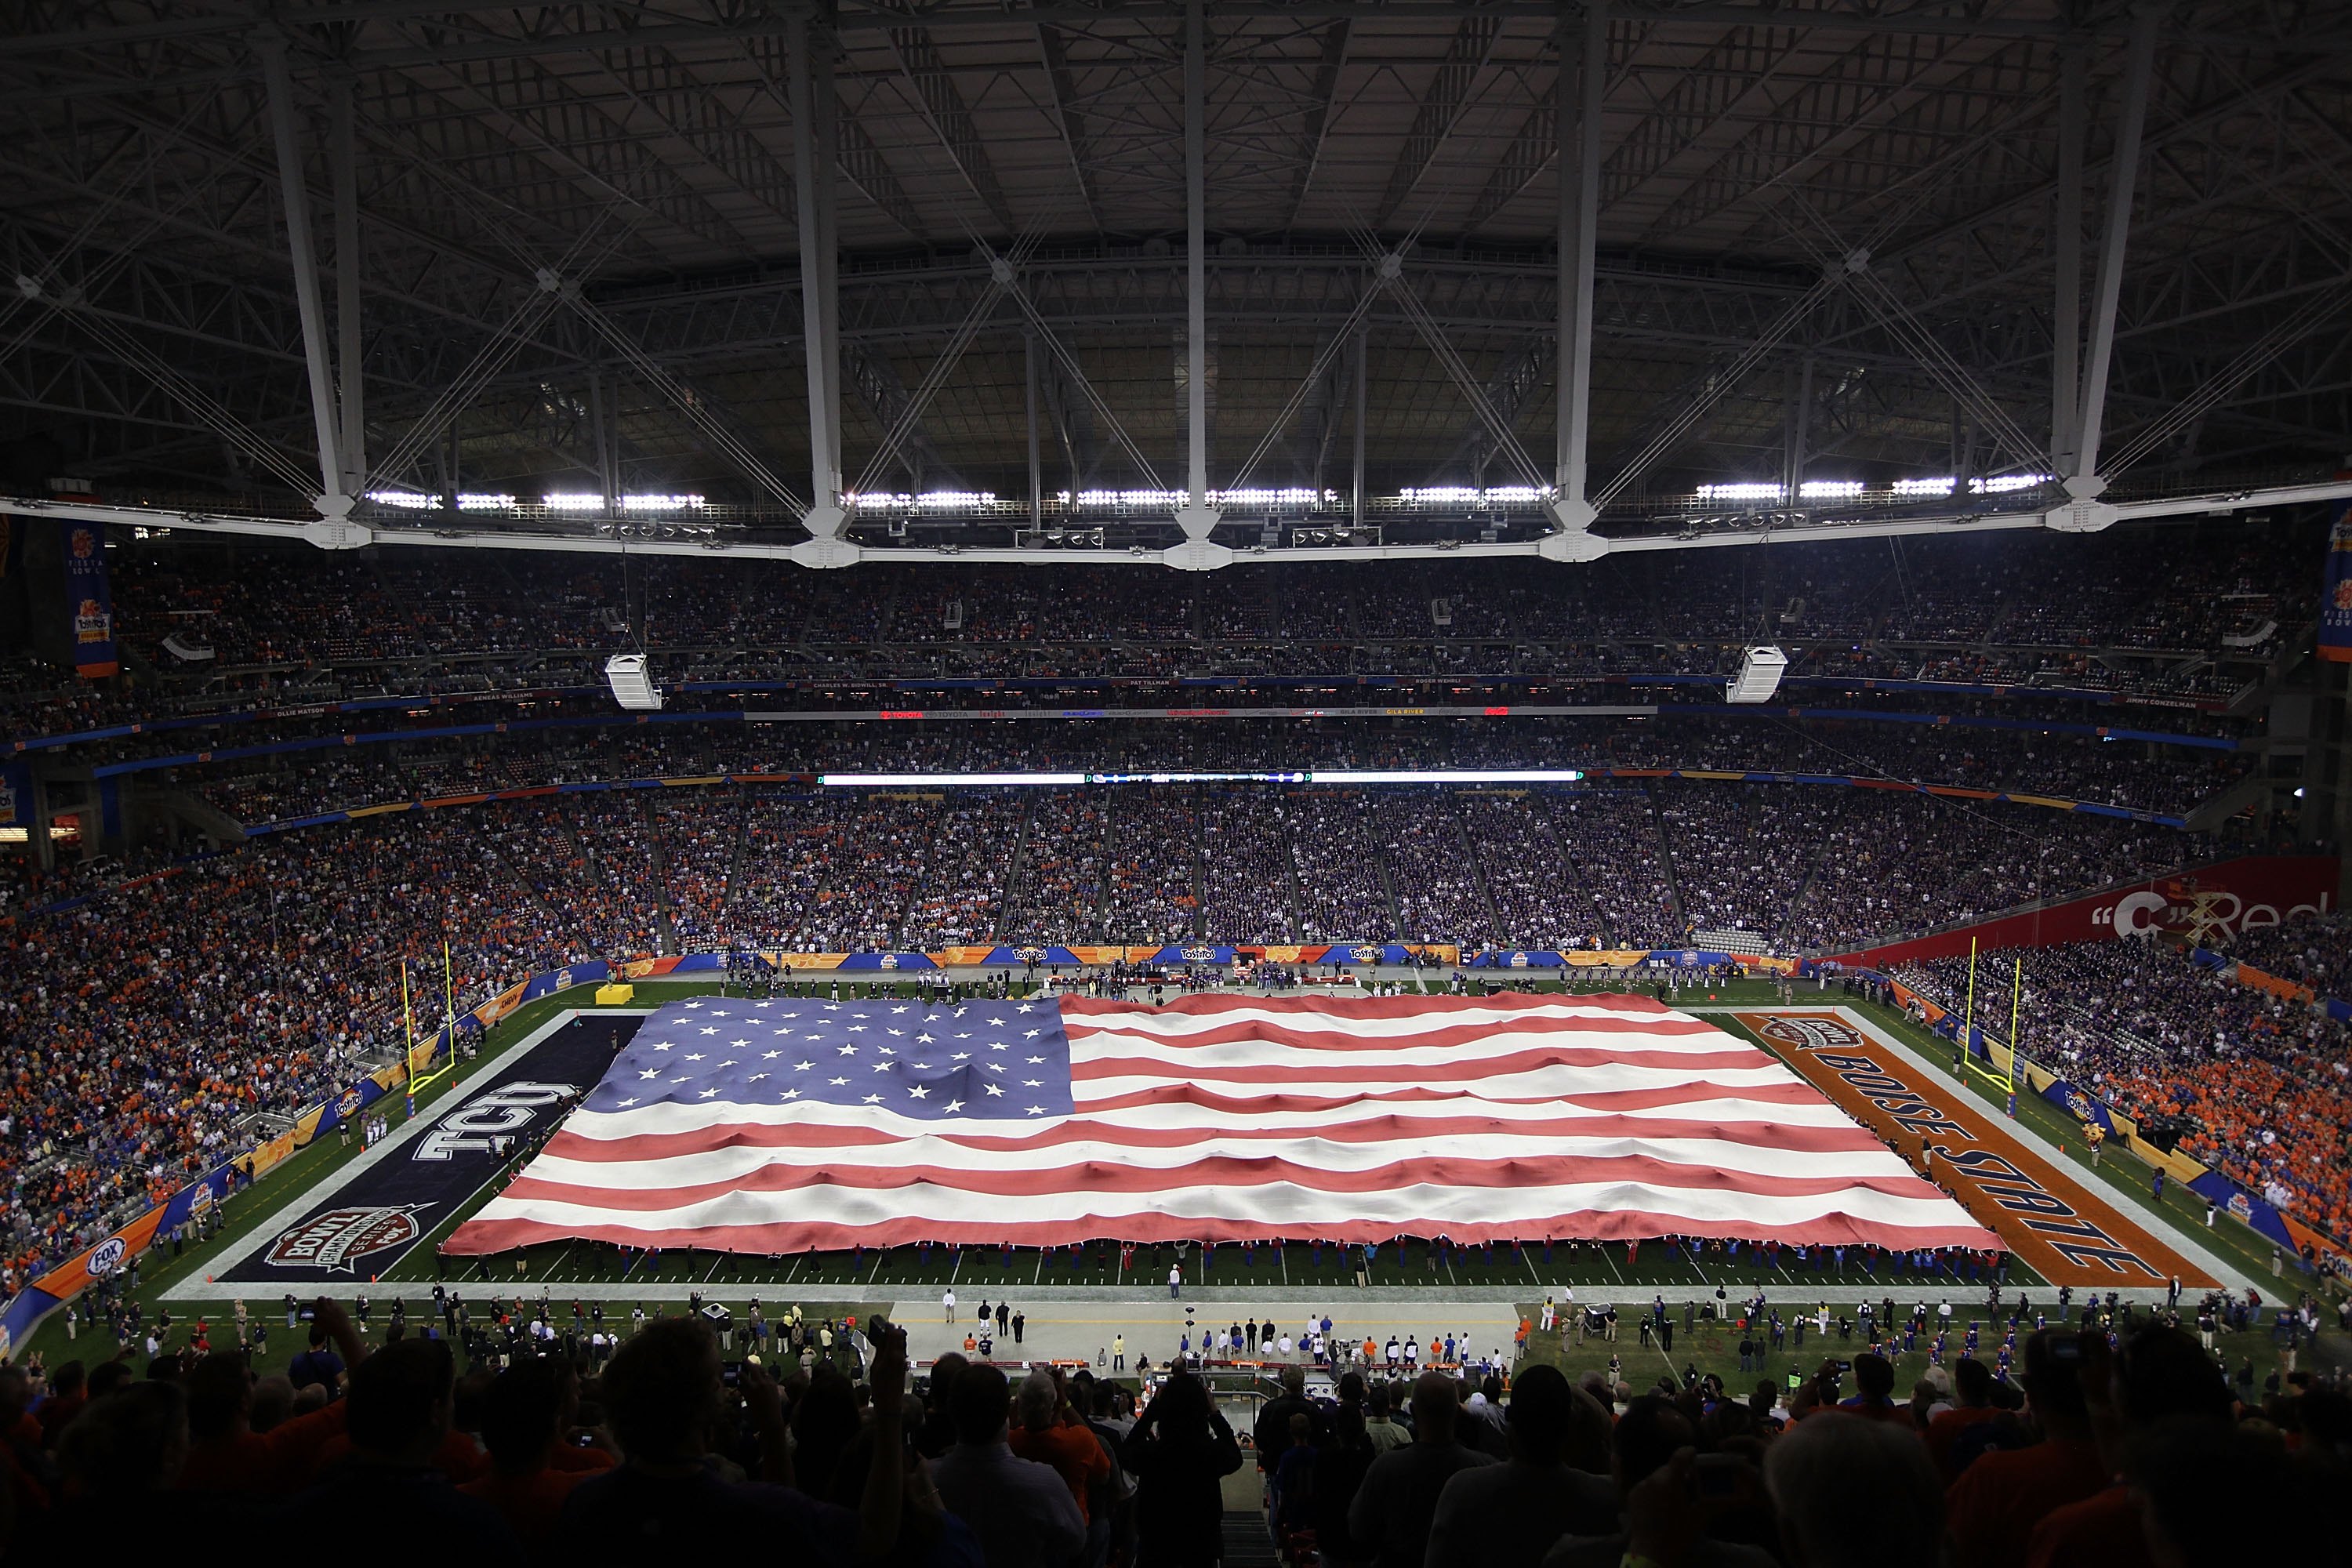 GLENDALE, AZ - JANUARY 04:  A general view of the American flag on the field during the national anthem before the Tostitos Fiesta Bowl between the Boise State Broncos and the TCU Horned Frogs at the Universtity of Phoenix Stadium on January 4, 2010 in Gl